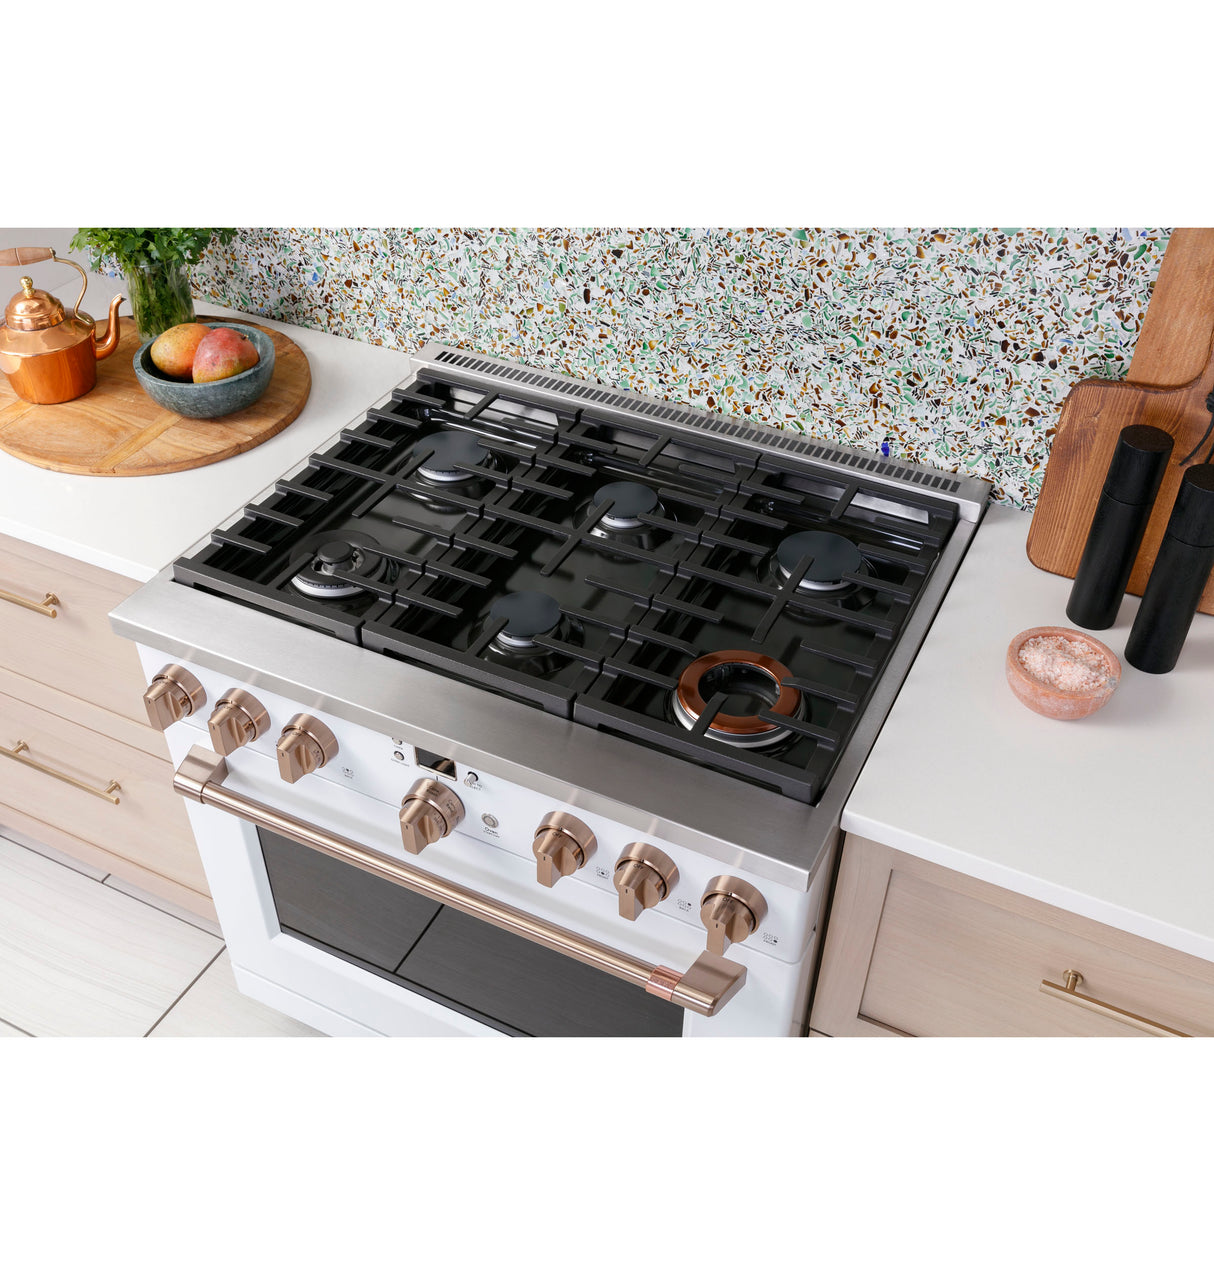 Caf(eback)(TM) 36" Smart All-Gas Commercial-Style Range with 6 Burners (Natural Gas) - (CGY366P4TW2)